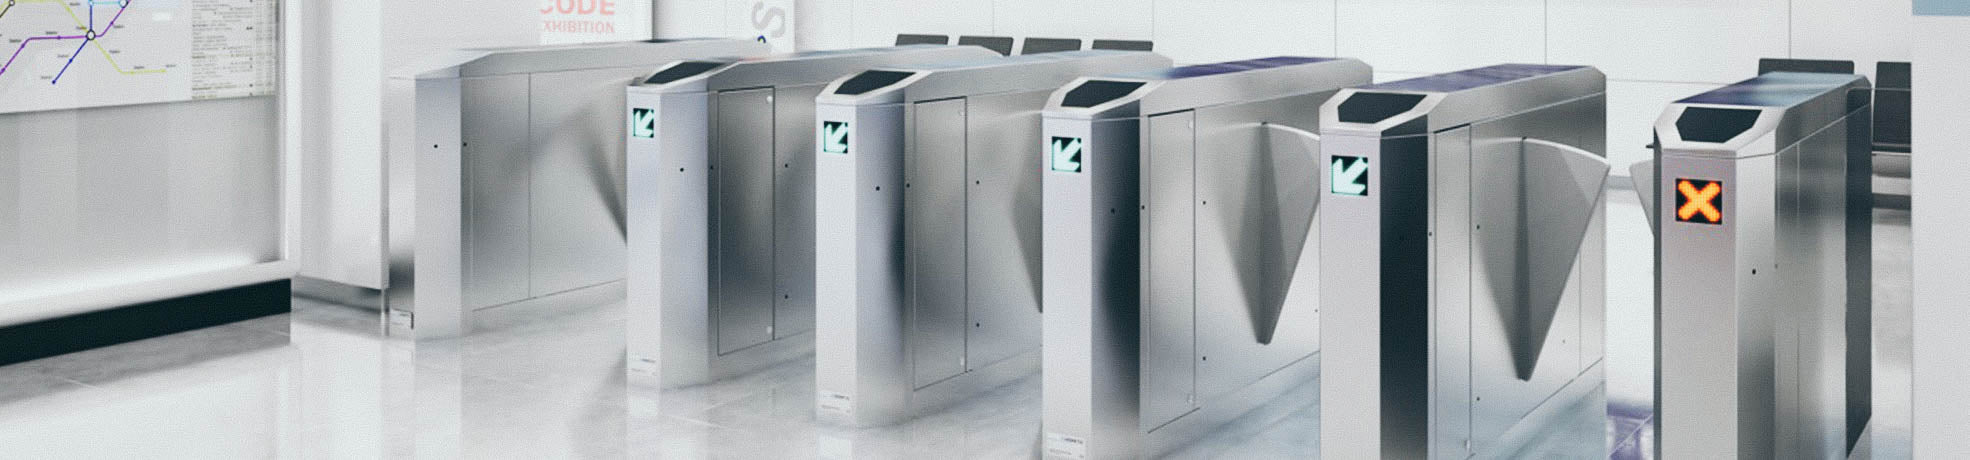 Automated Fare Collection Gates | All Security Equipment